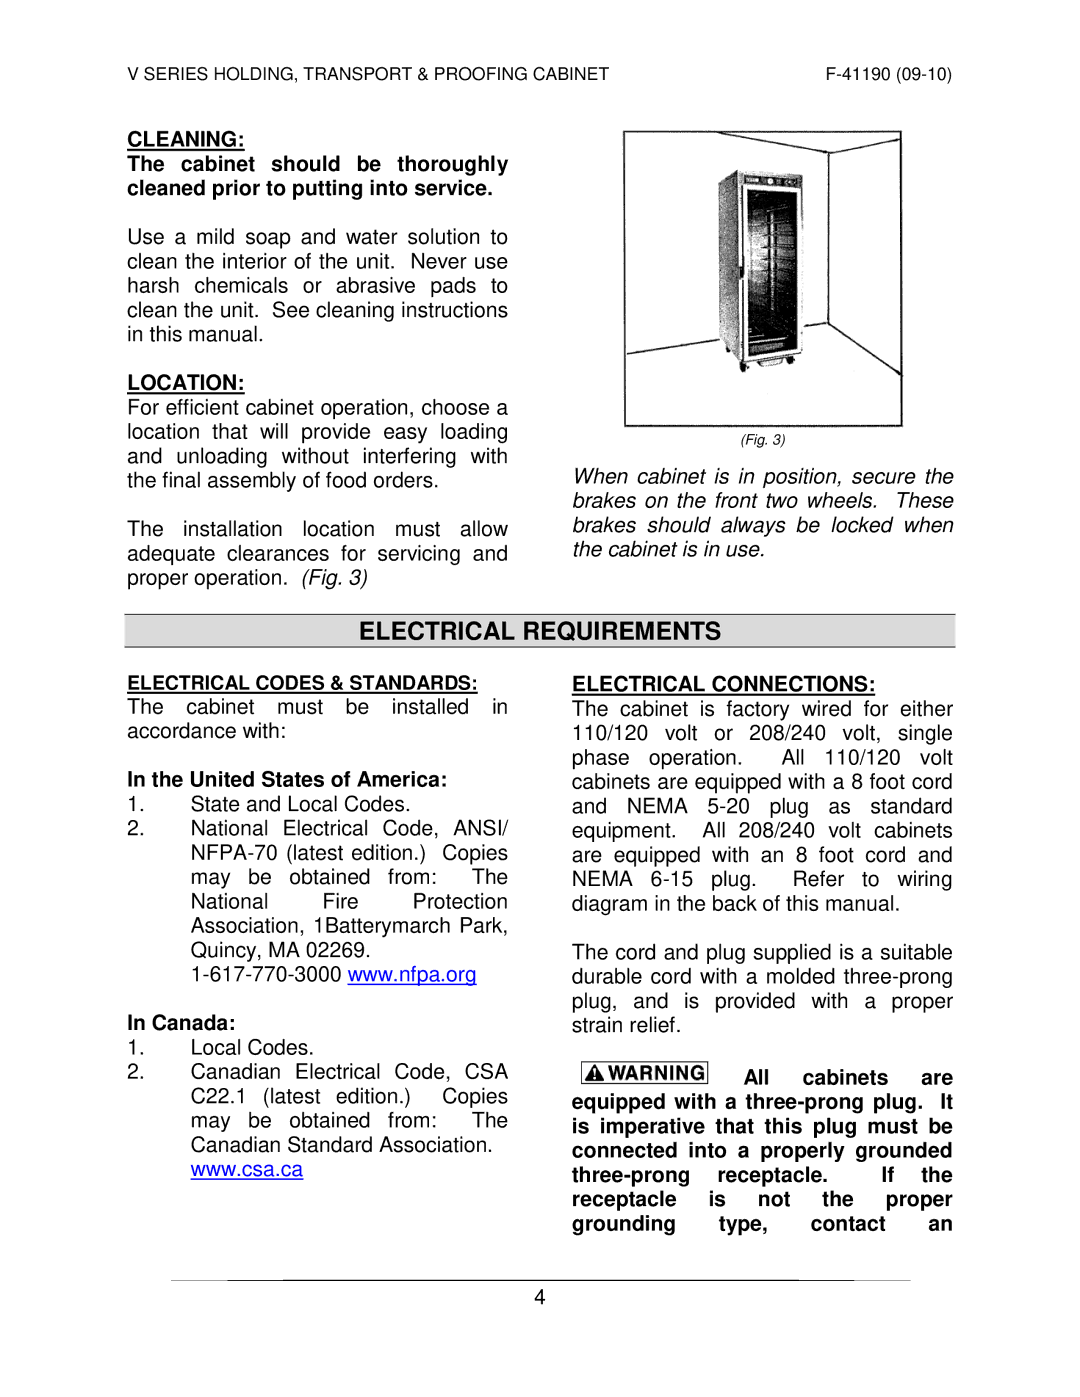 Vulcan-Hart VP18 ML-138089 operation manual Electrical Requirements, Cleaning, Location, Electrical Connections 